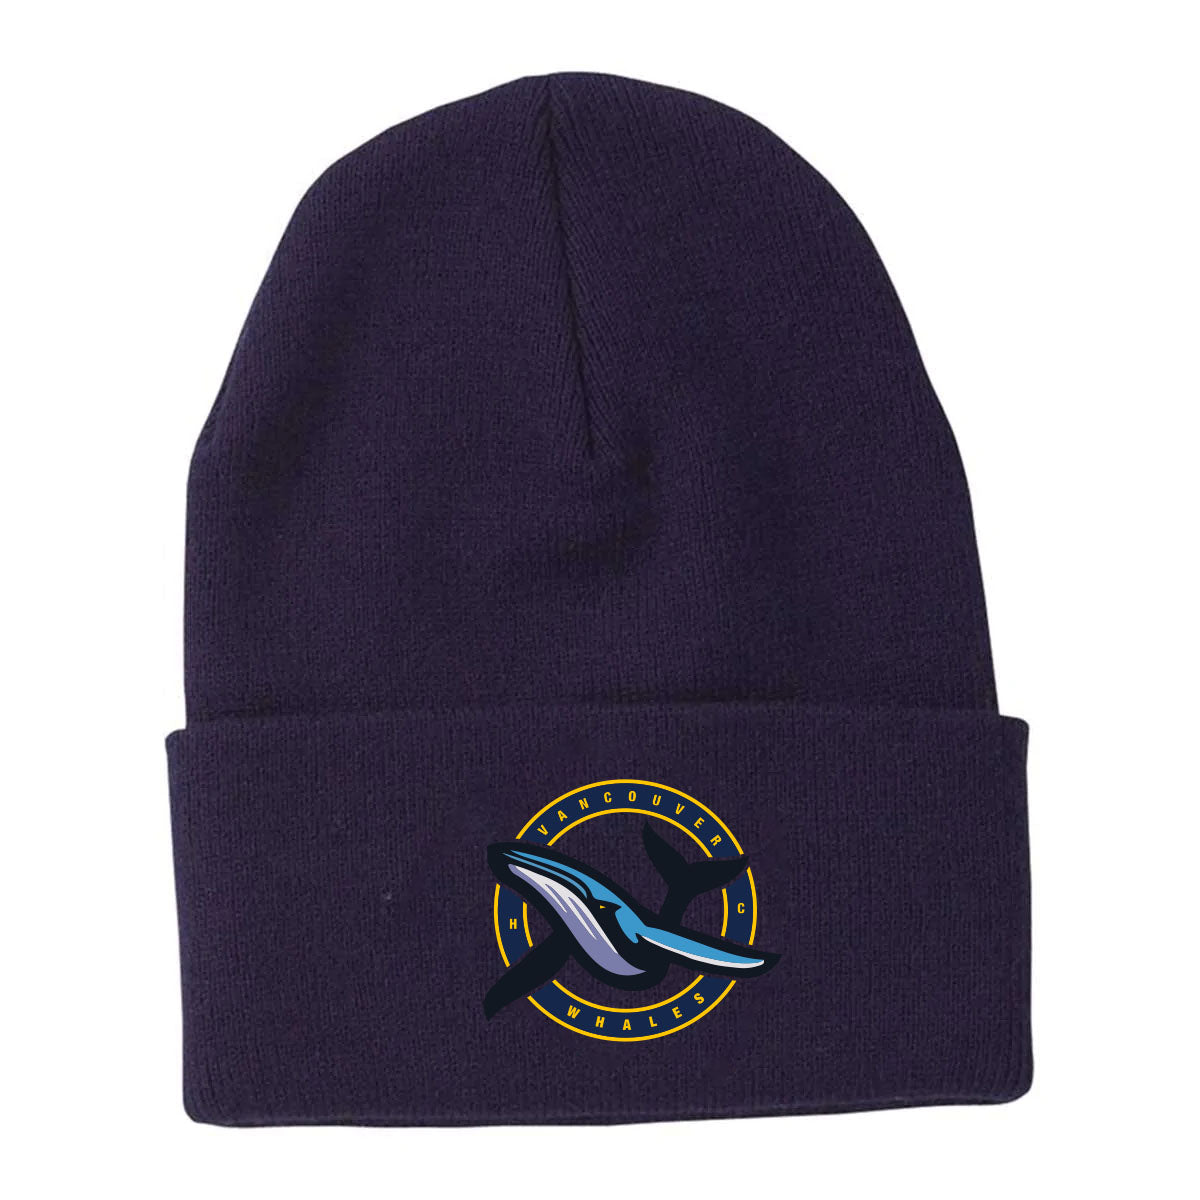 Vancouver Whales -- Knit Cuffed Toque